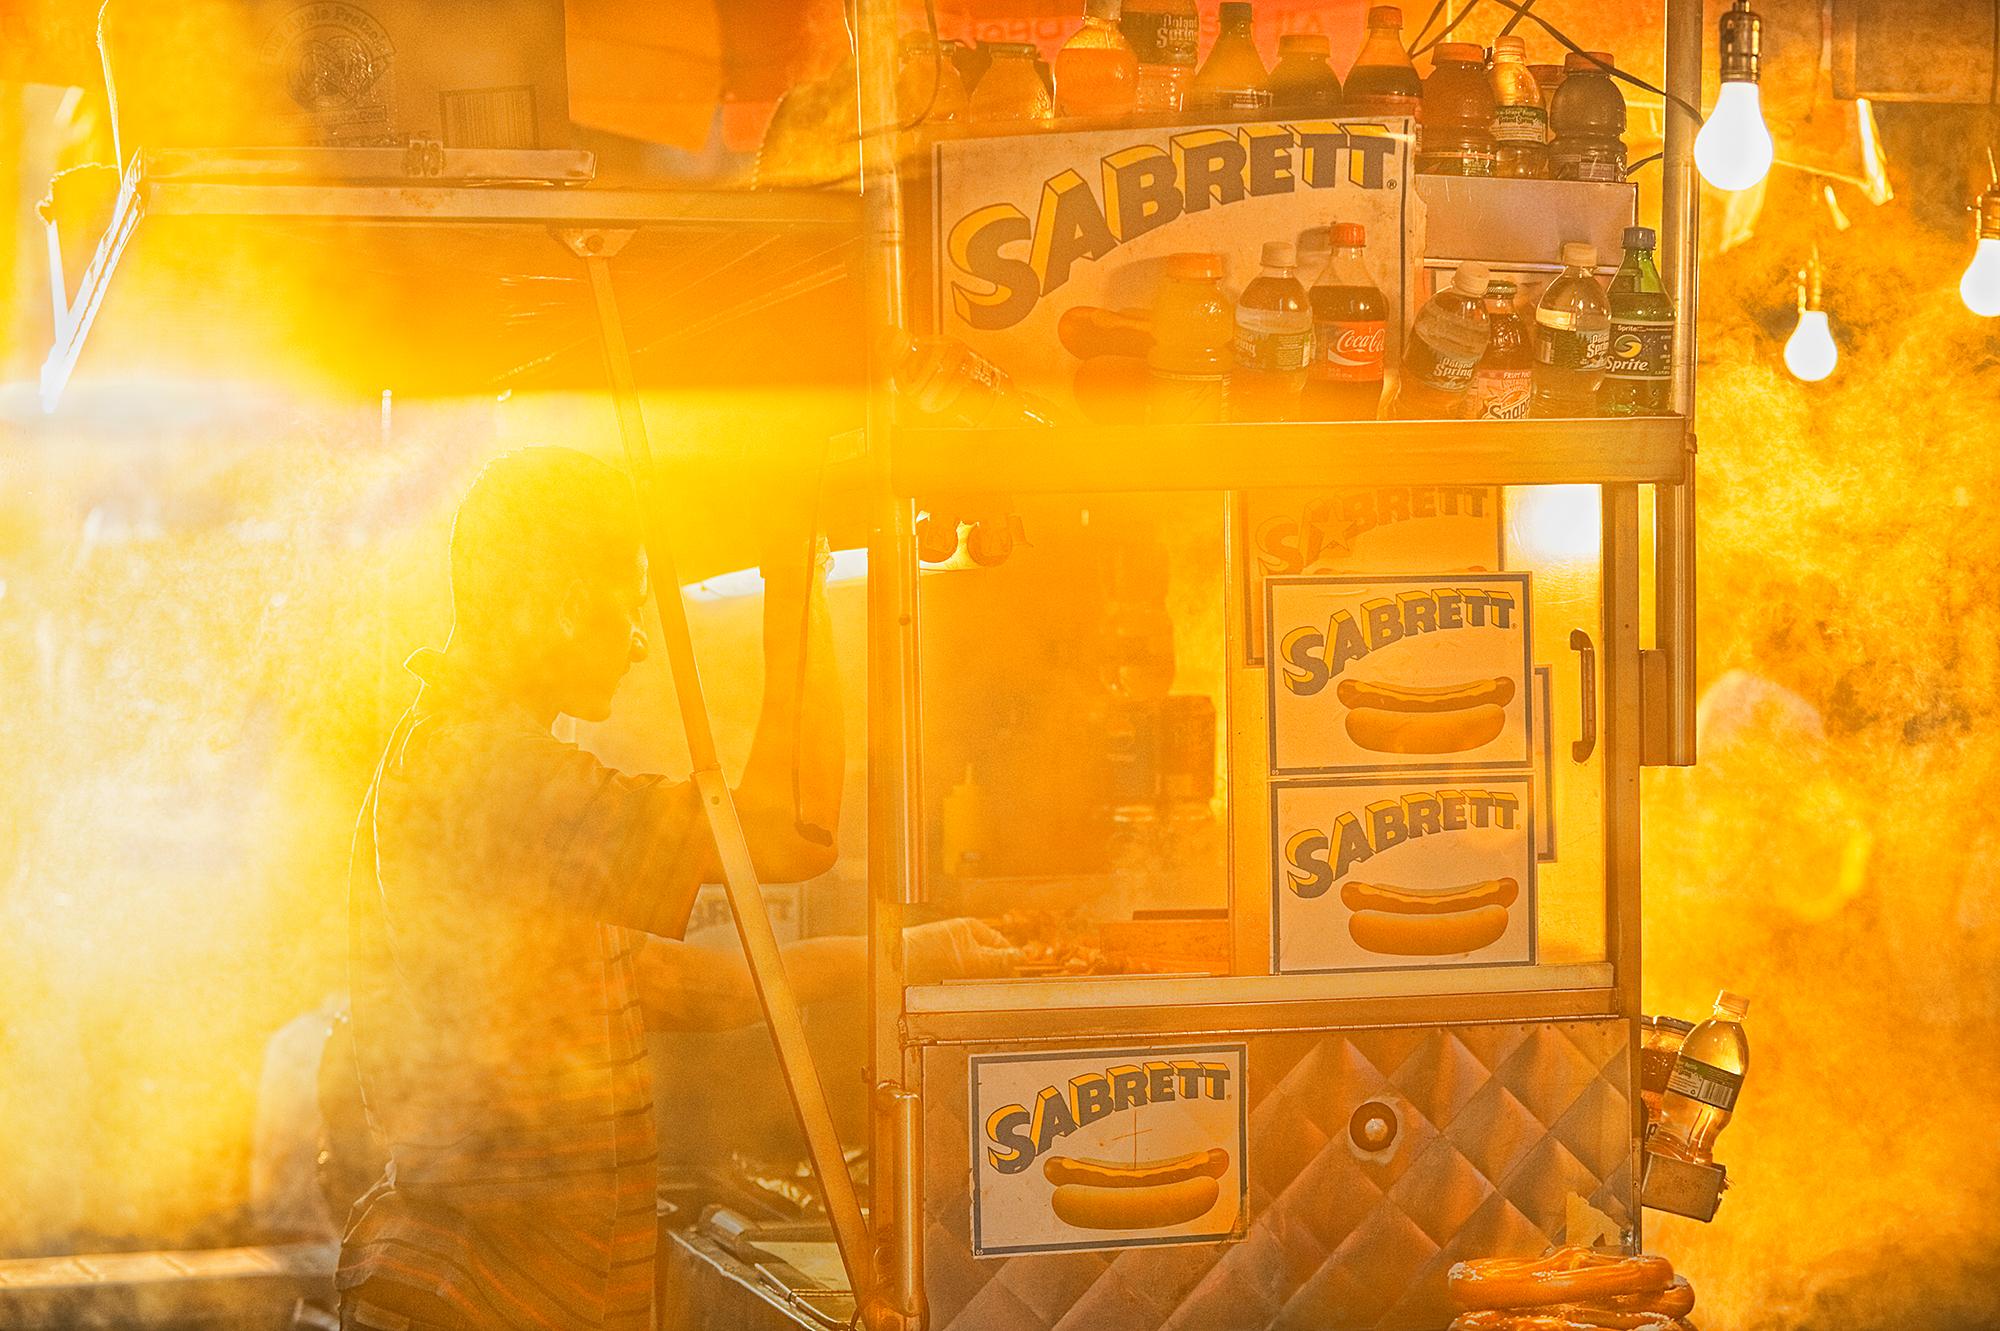 Mitchell Funk Abstract Photograph - Sabrett Hot Dog Vendors, Times Square,  Golden Light, Street Photography